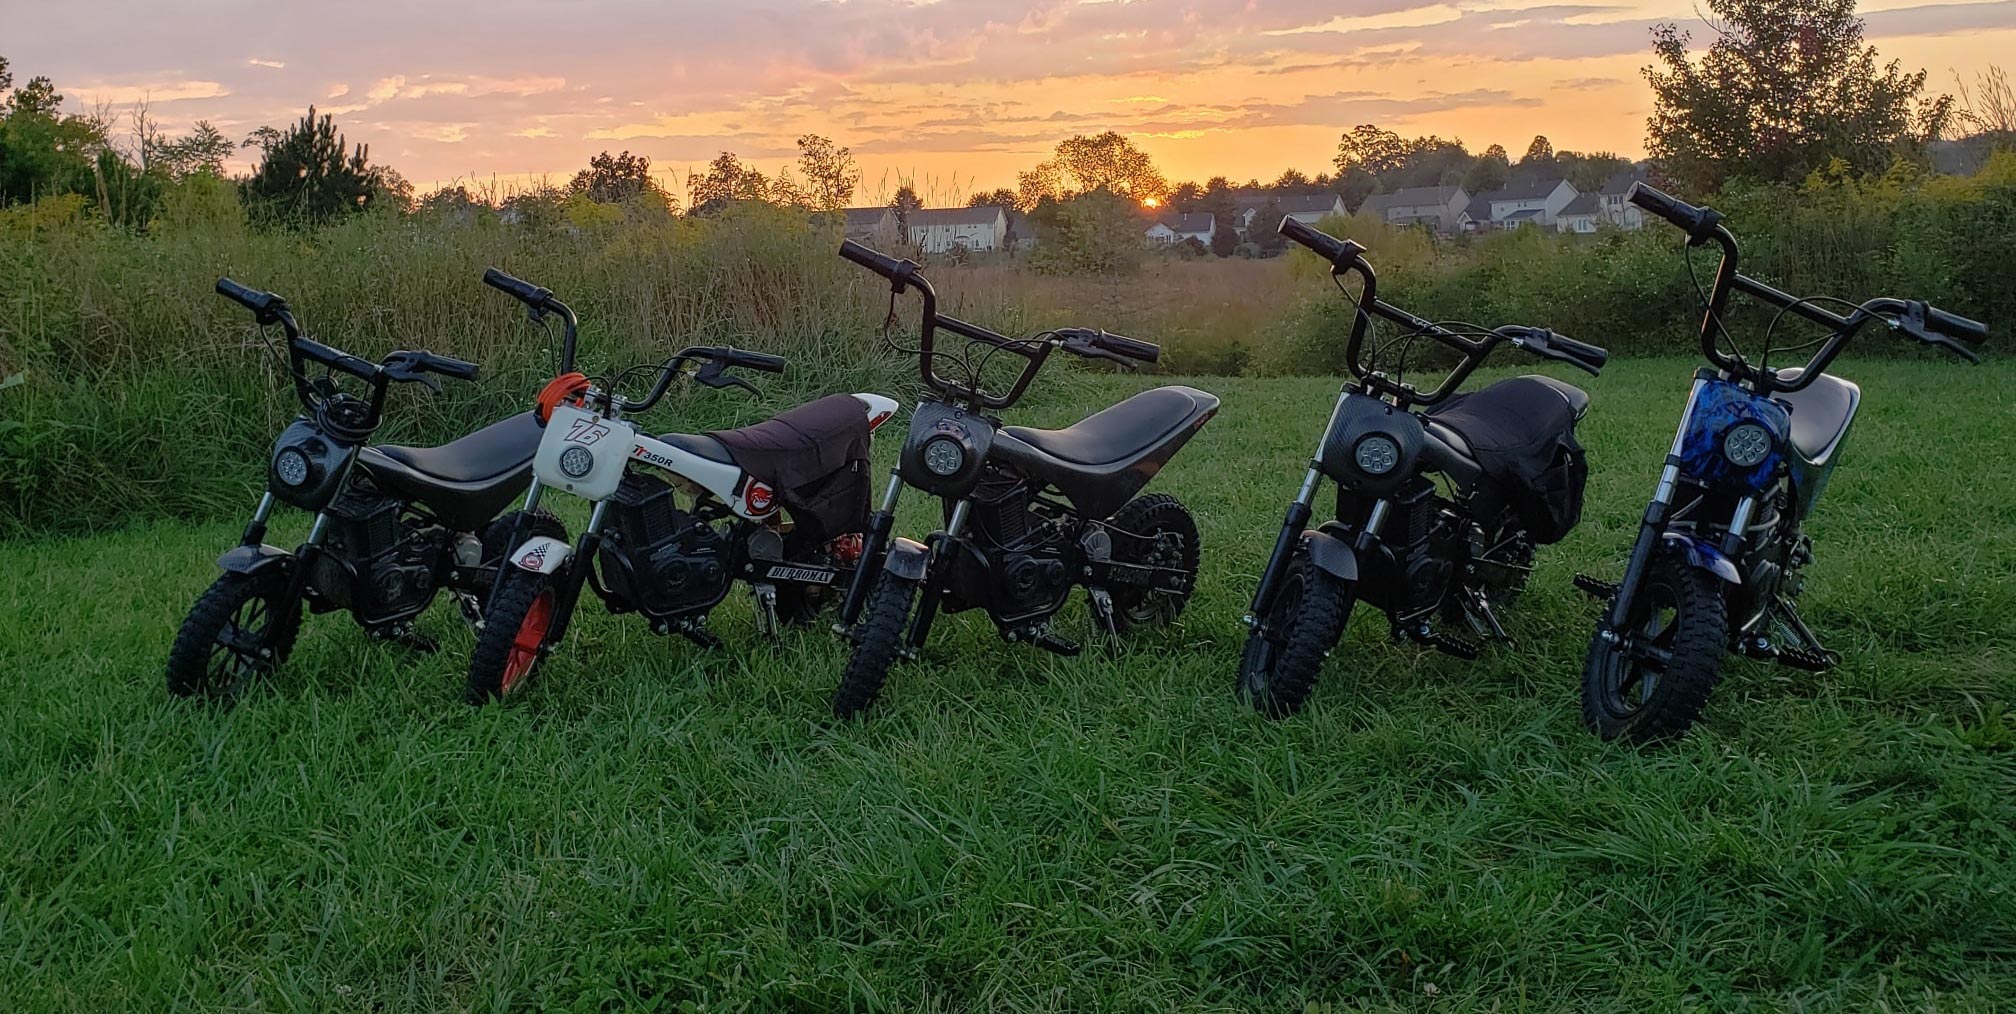 5 iconic electric minibikes in green paddock